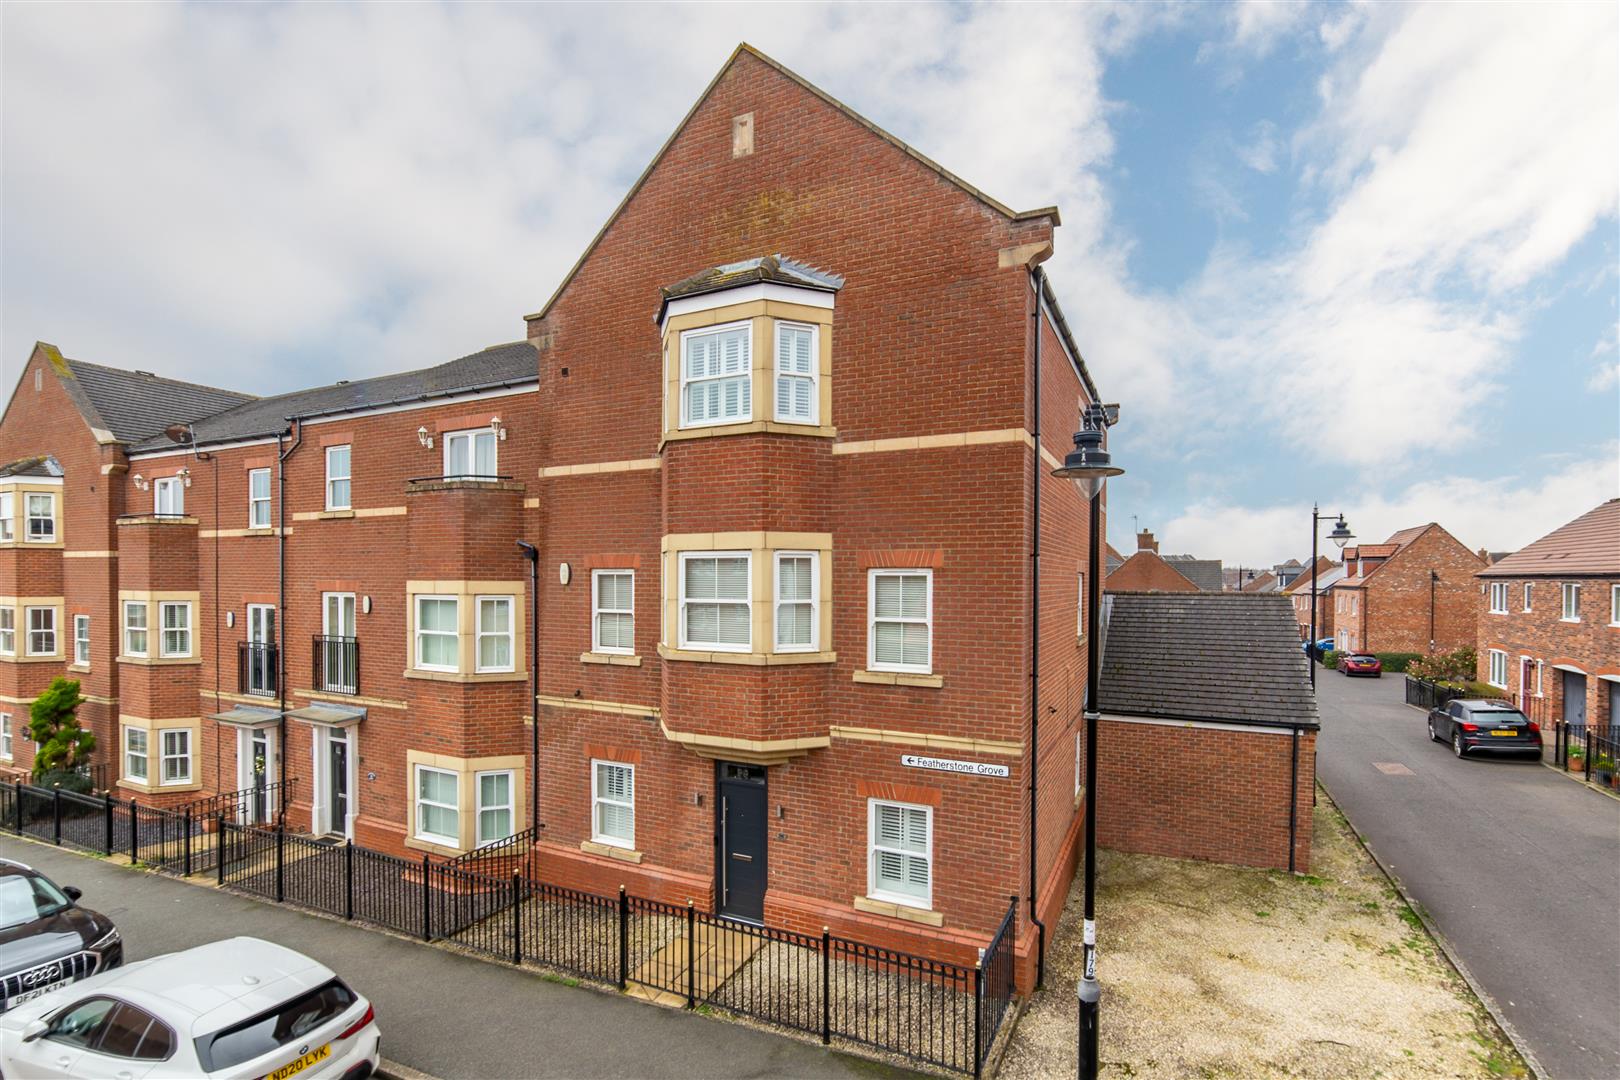 5 bed town house for sale in Featherstone Grove, Newcastle Upon Tyne, NE3 